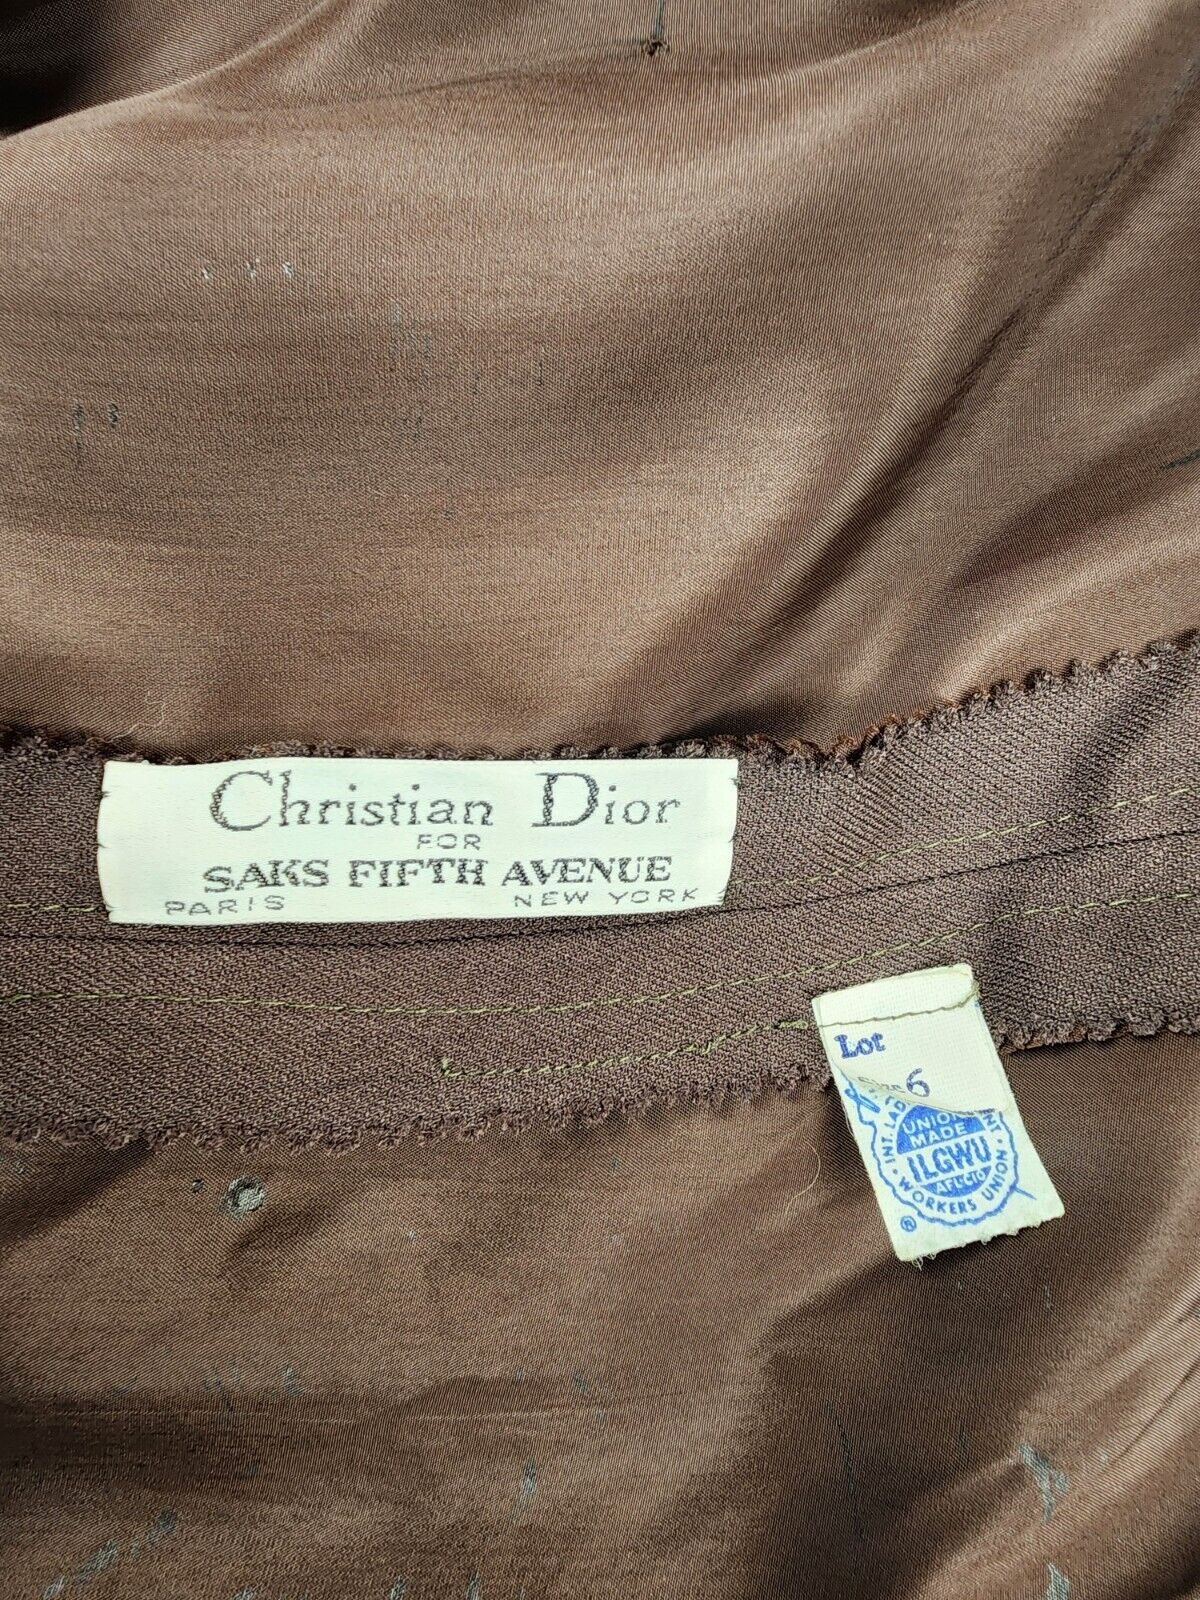 1970s label from dior